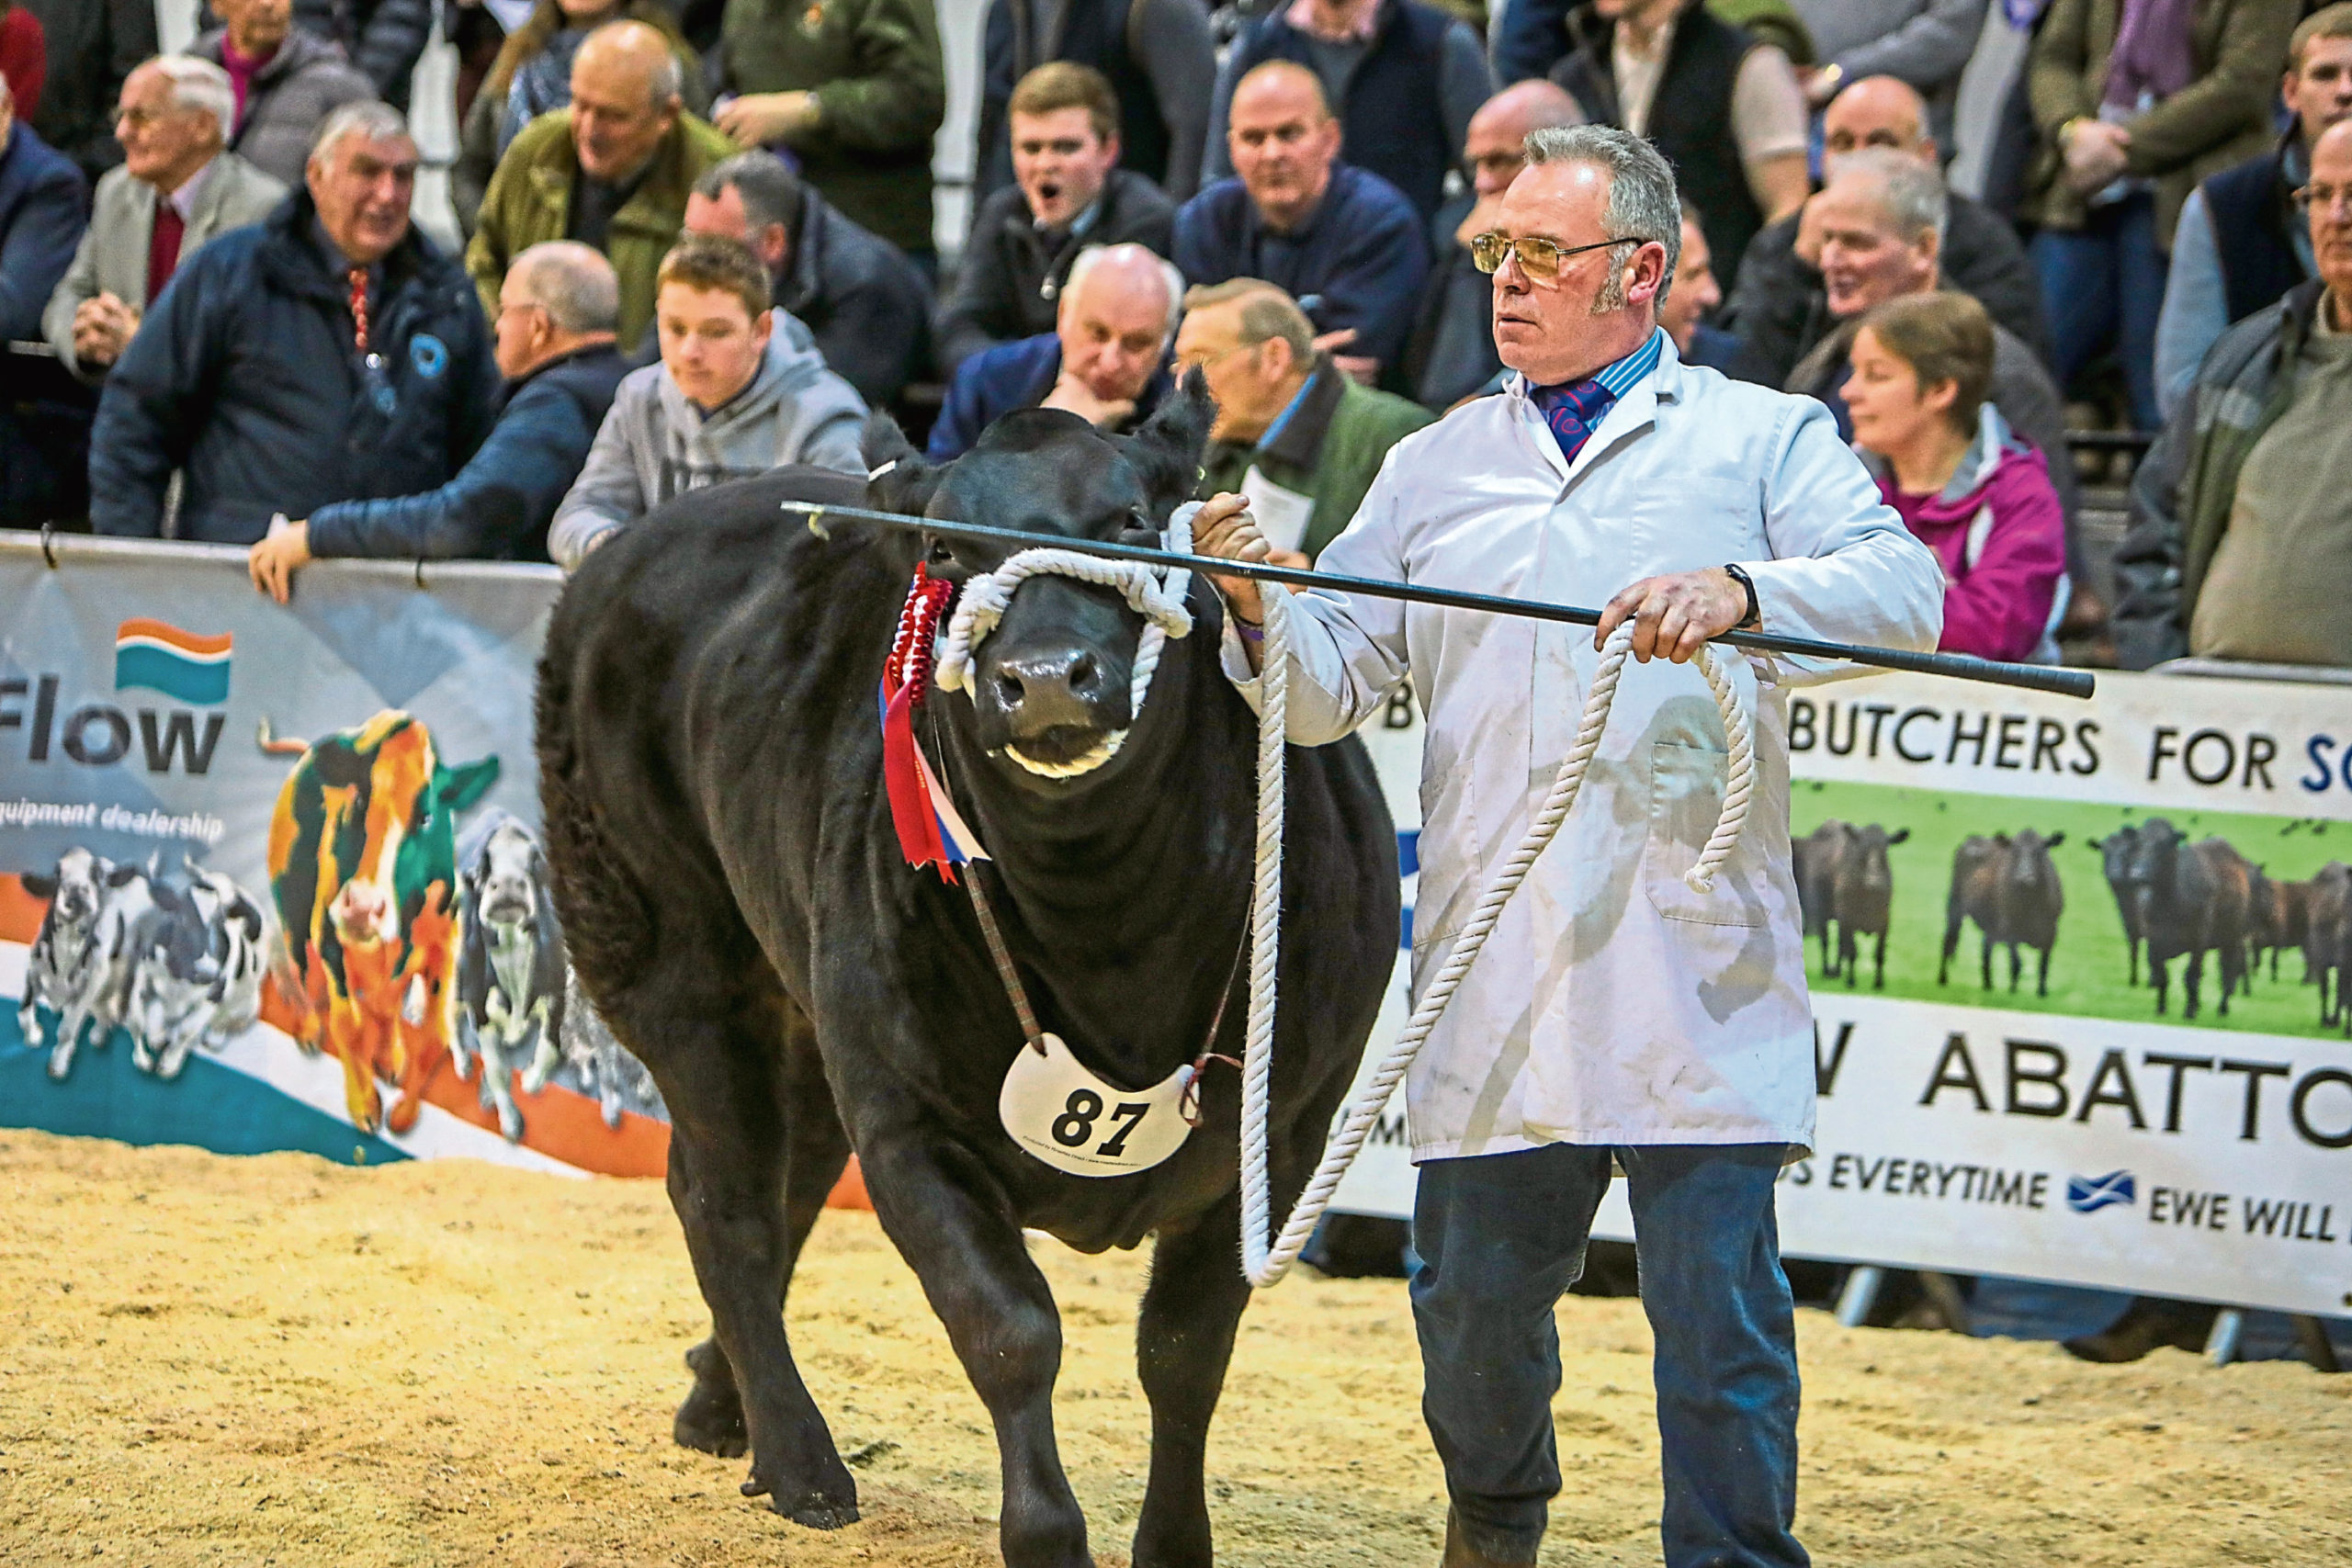 Exhibitors at this year's show will not be able to parade their animals around the ring.